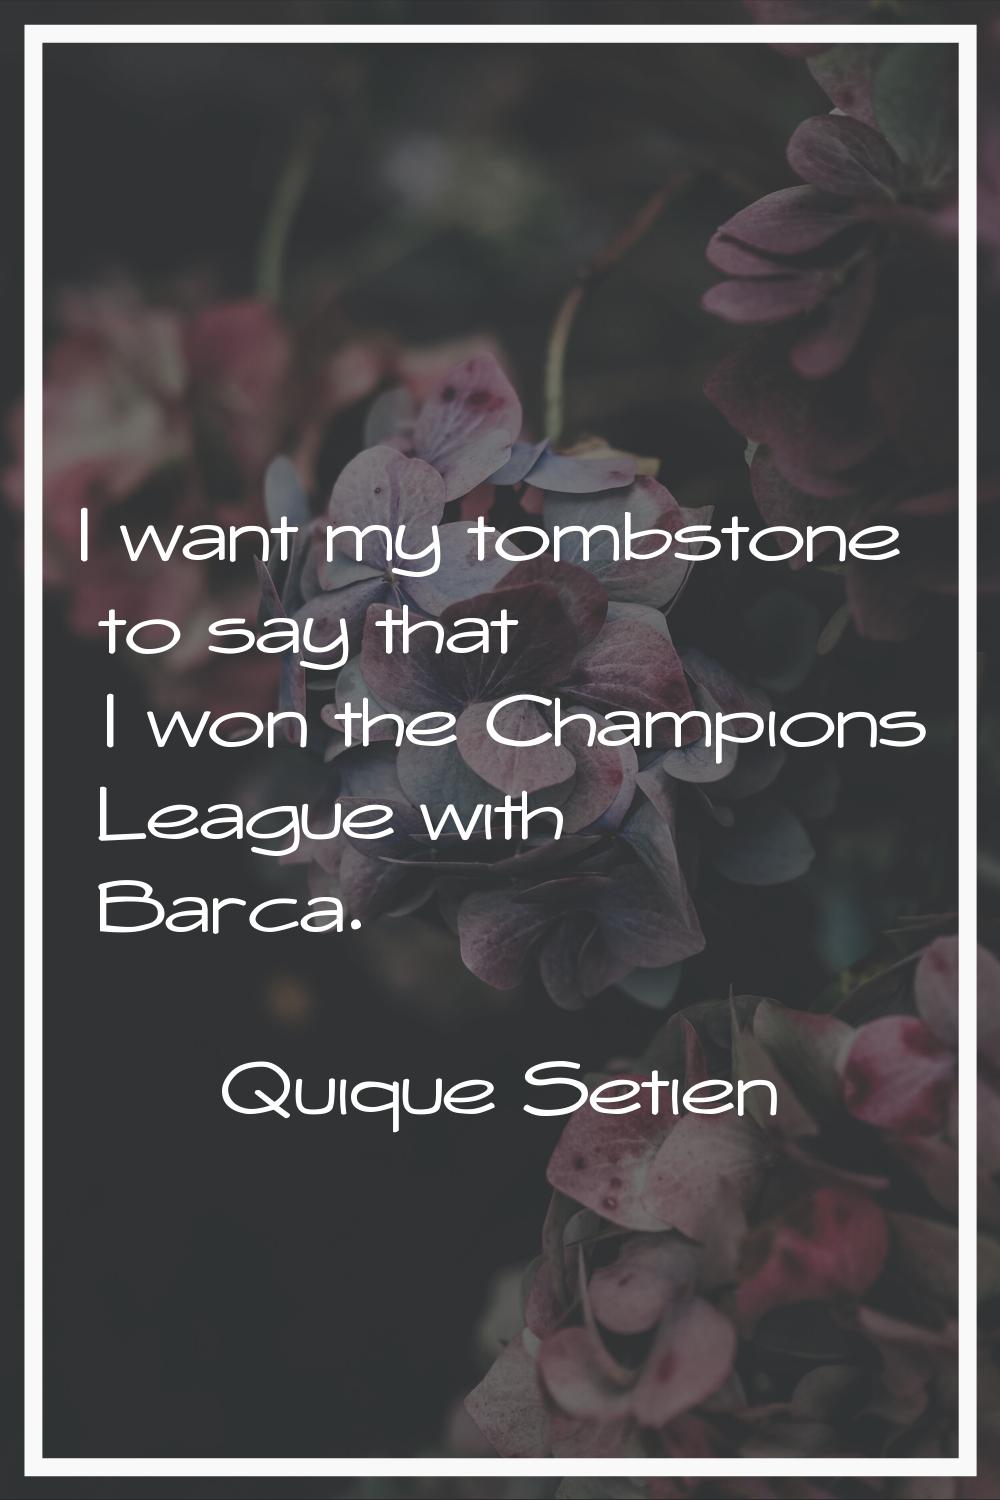 I want my tombstone to say that I won the Champions League with Barca.